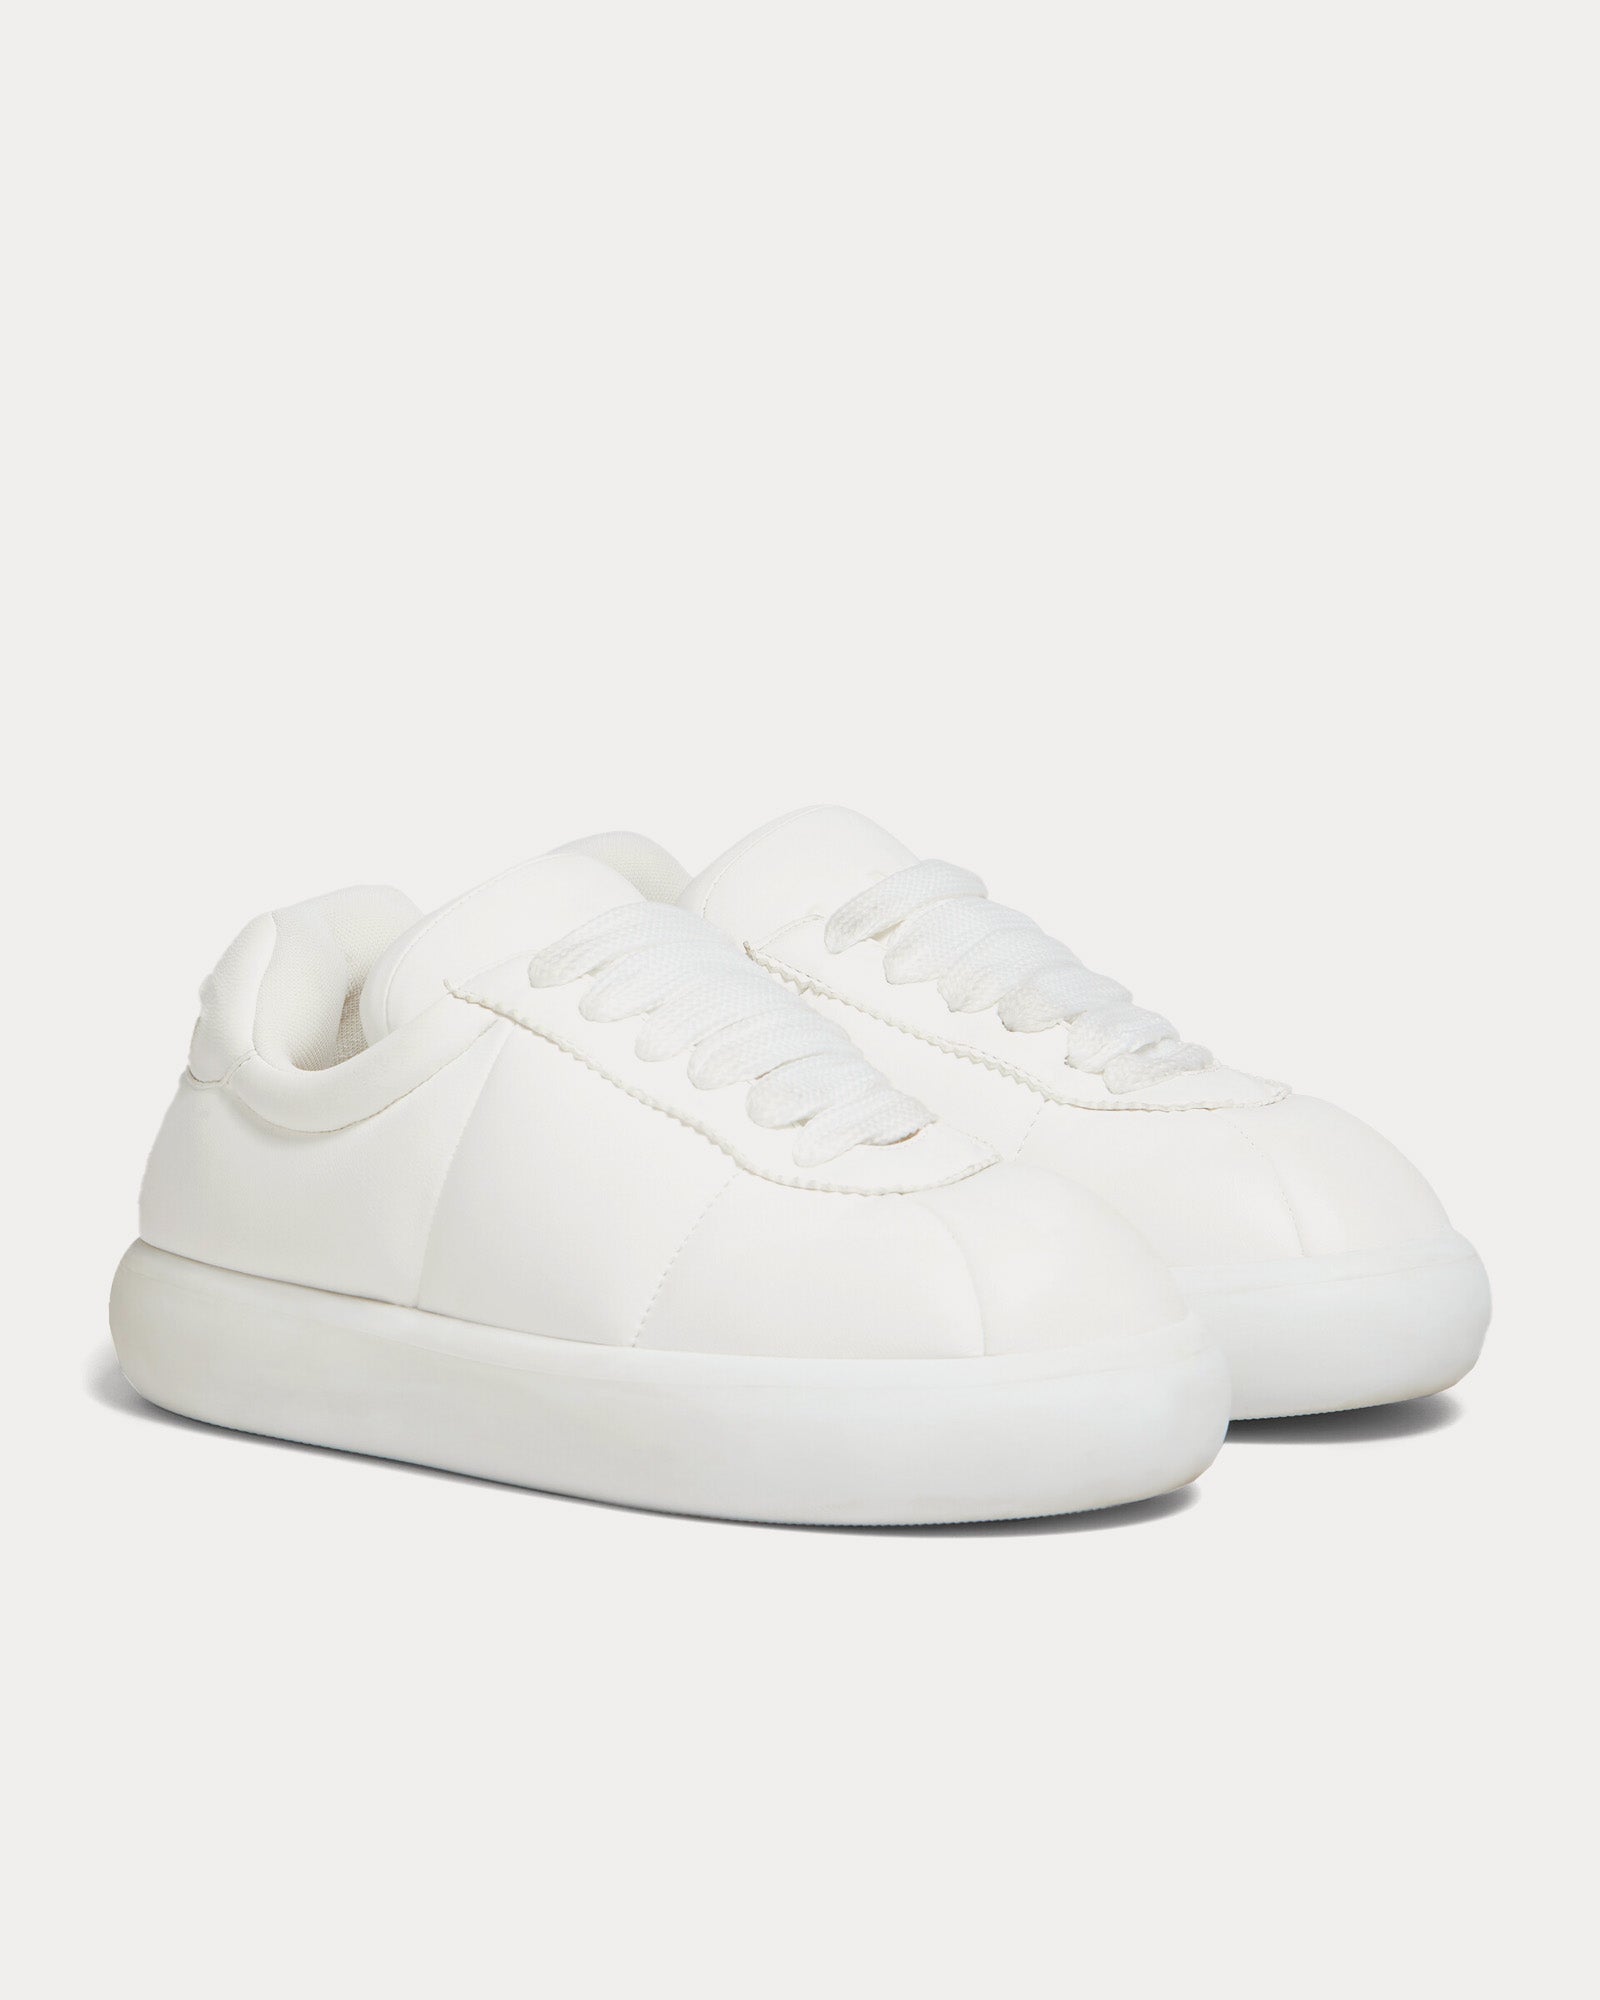 Marni - Bigfoot 2.0 Leather White Low Top Sneakers